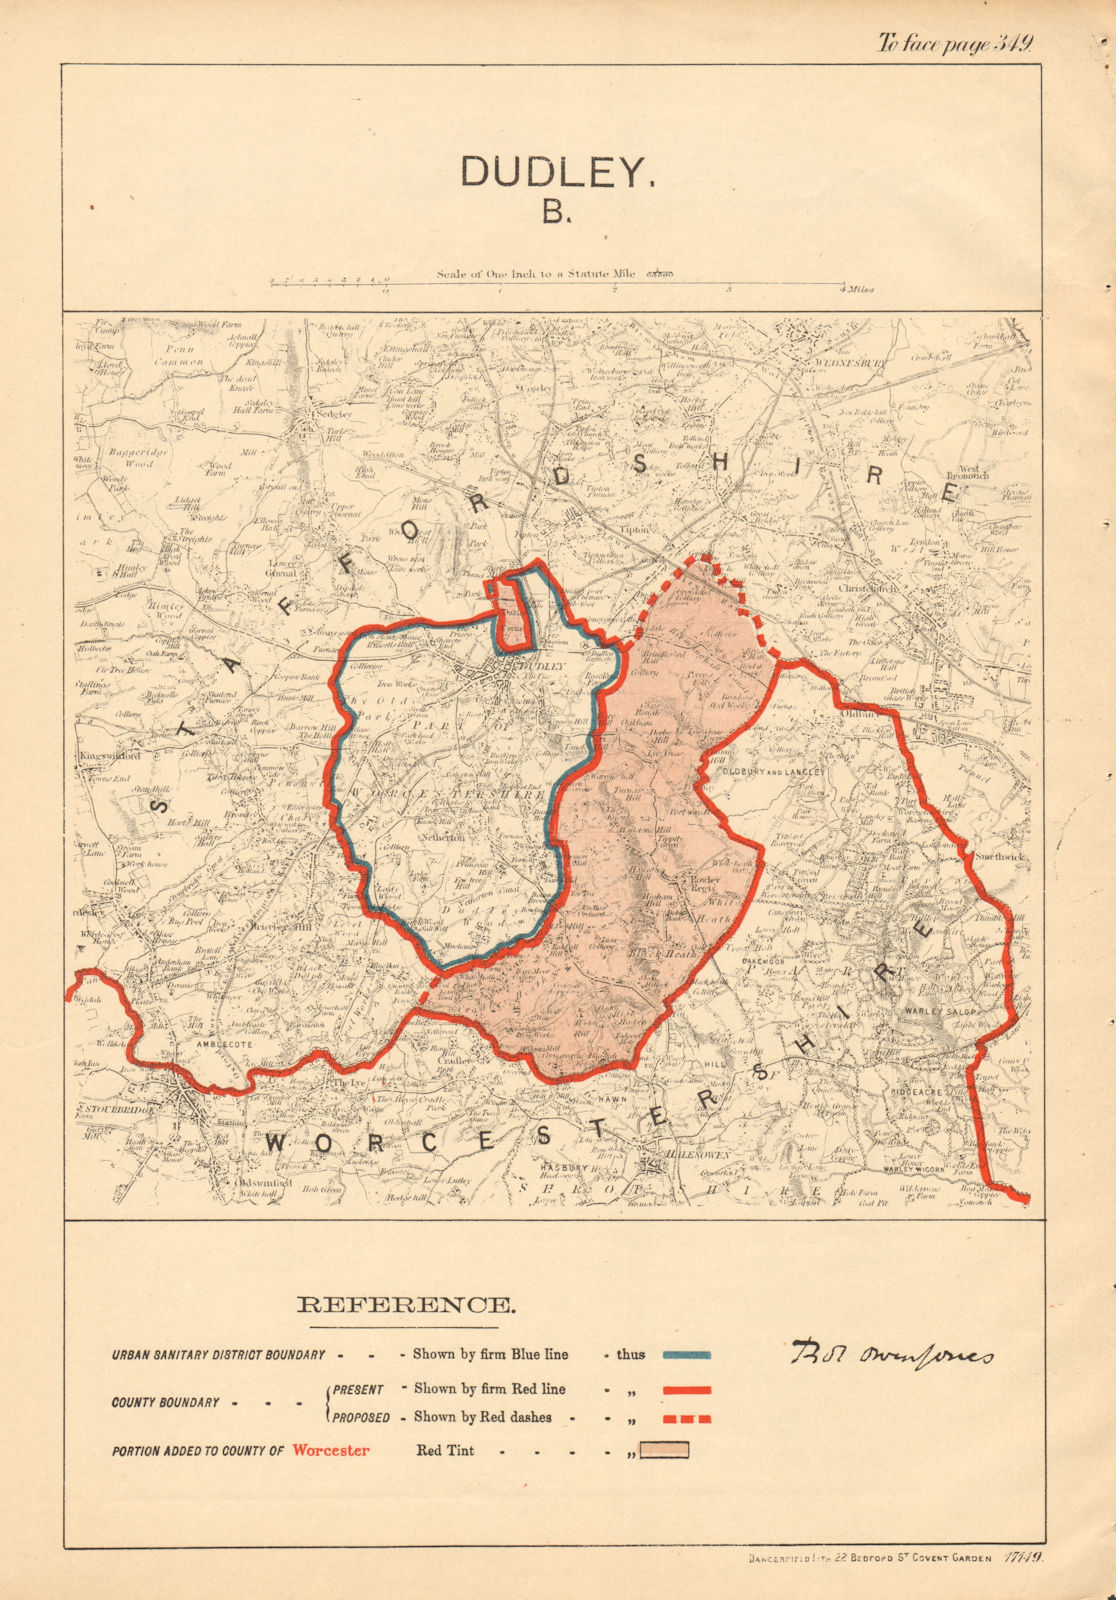 Associate Product Dudley. JONES. PARLIAMENTARY BOUNDARY COMMISSION 1888 old antique map chart